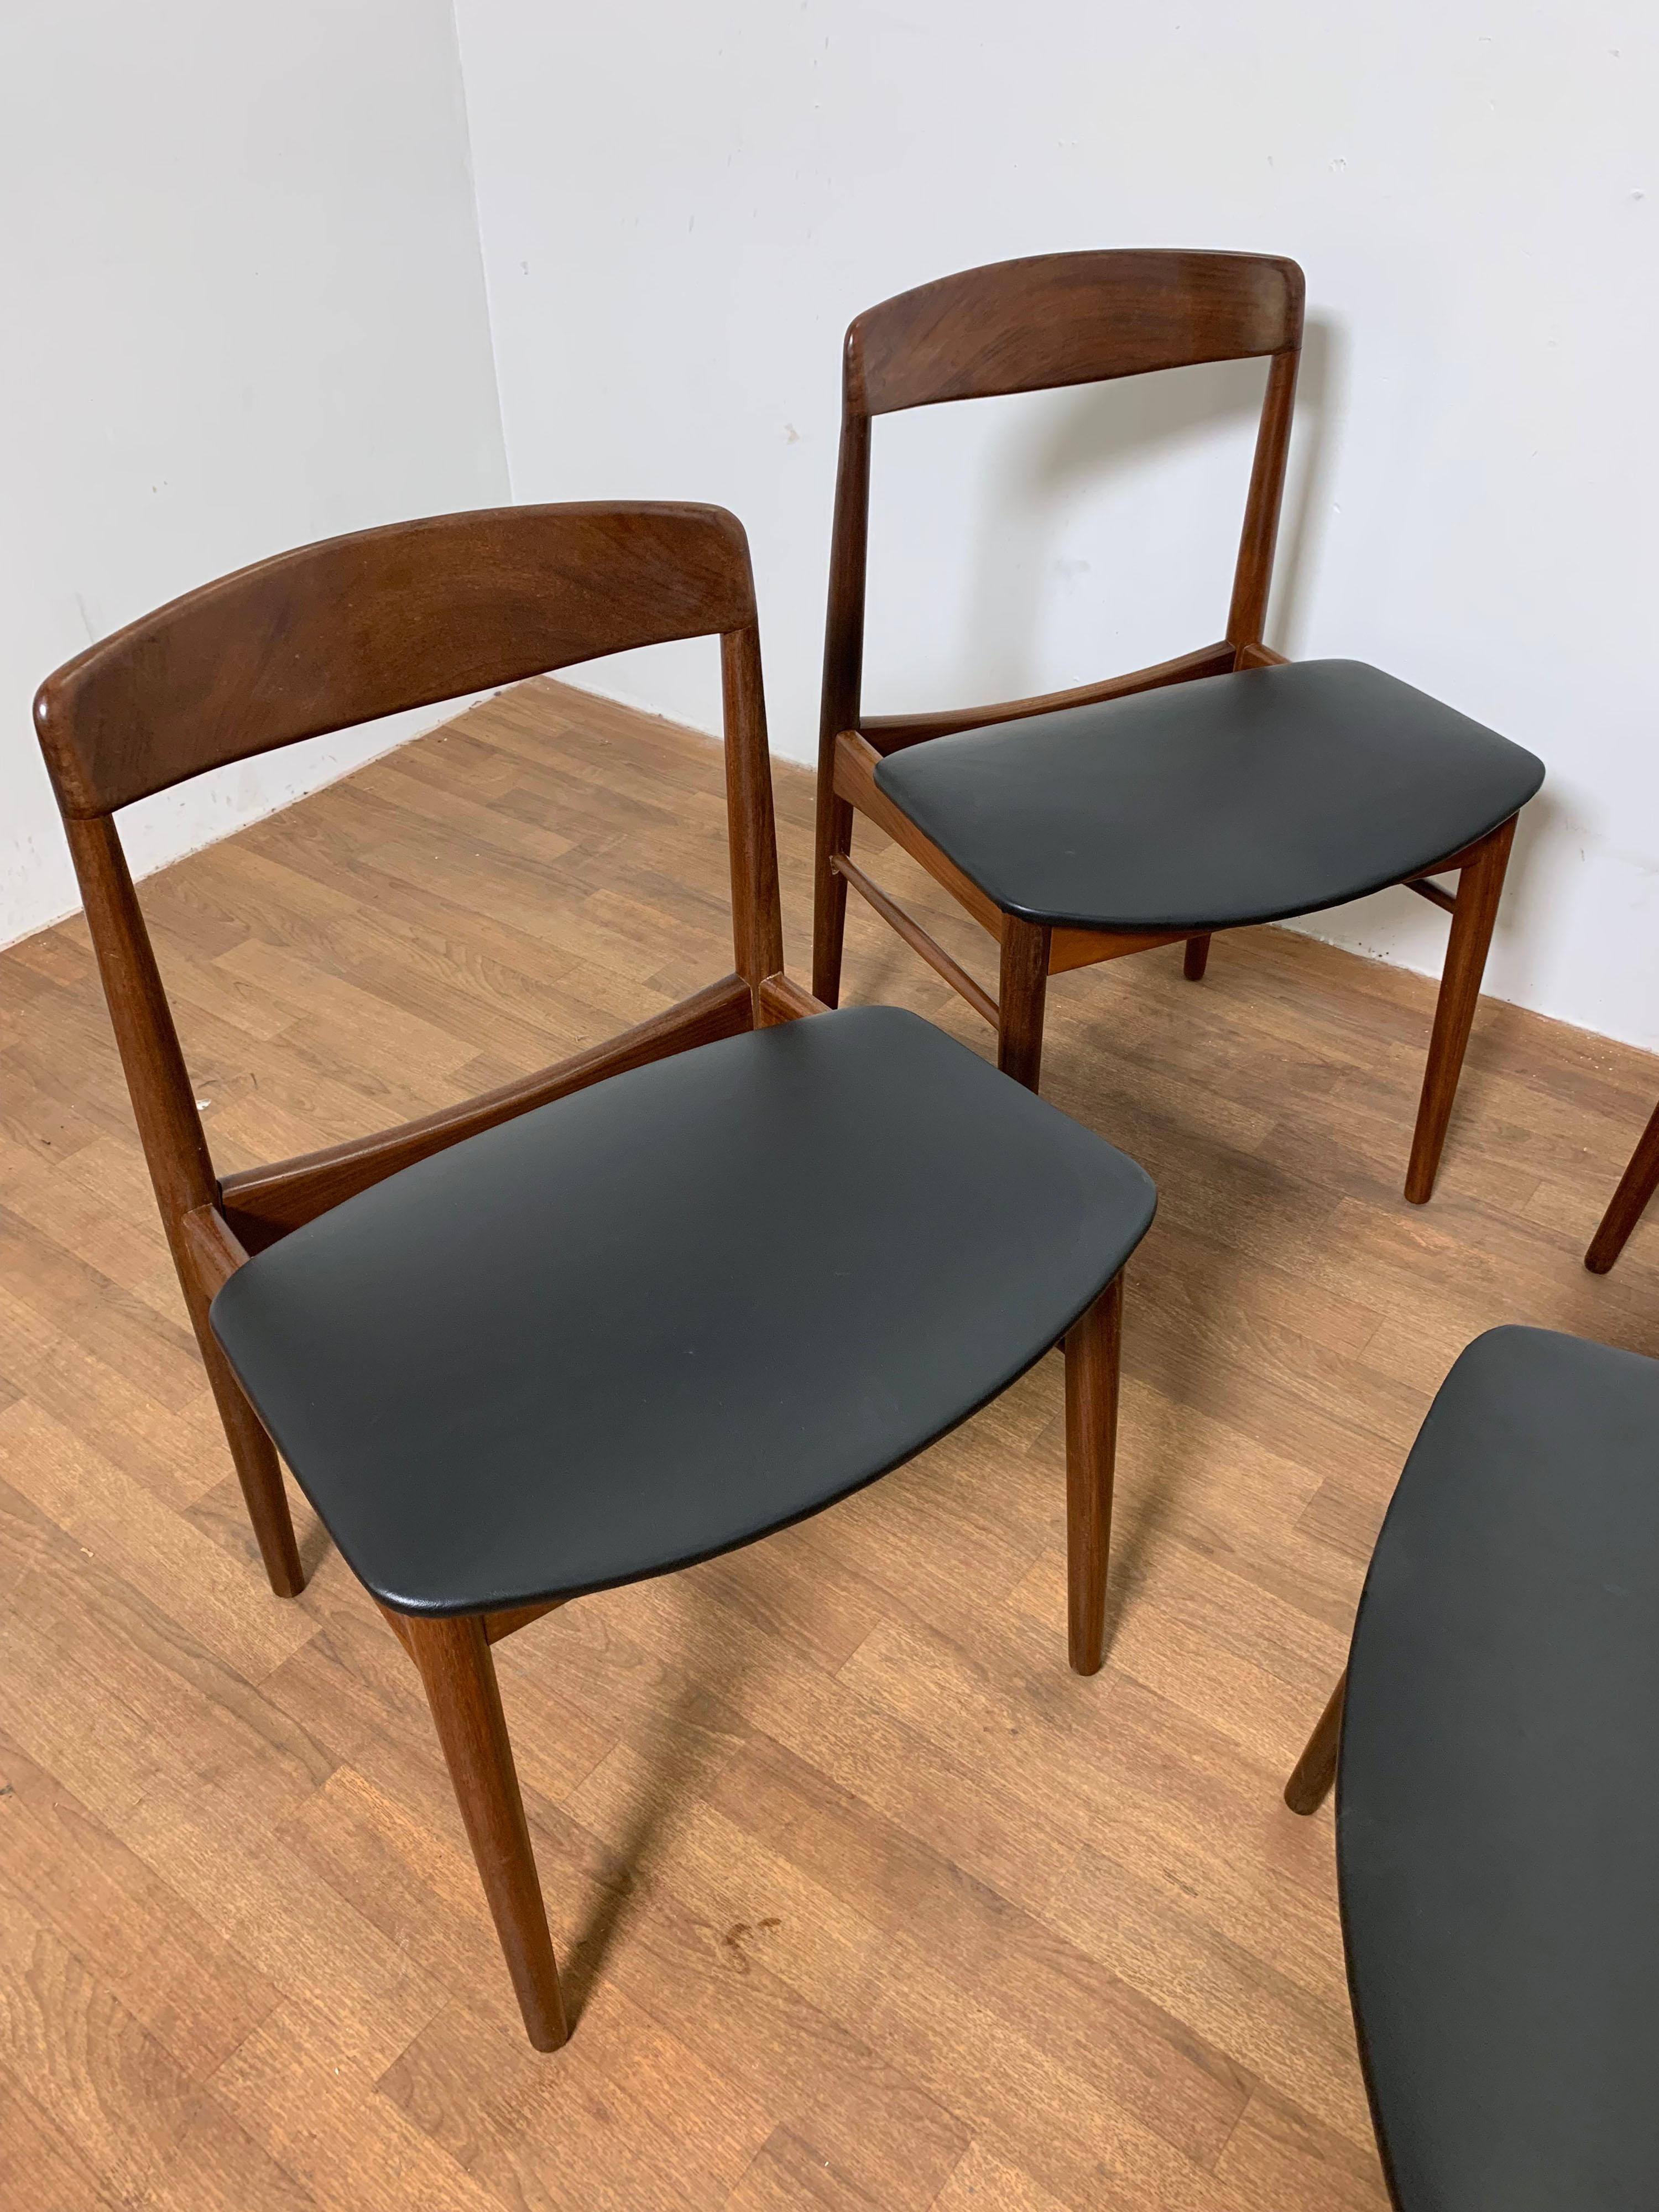 Set of four teak dining chairs with solid carved backs, by SAX (Saxkjobing Savvaerk Stolefabrik), made in Denmark, circa 1960s.